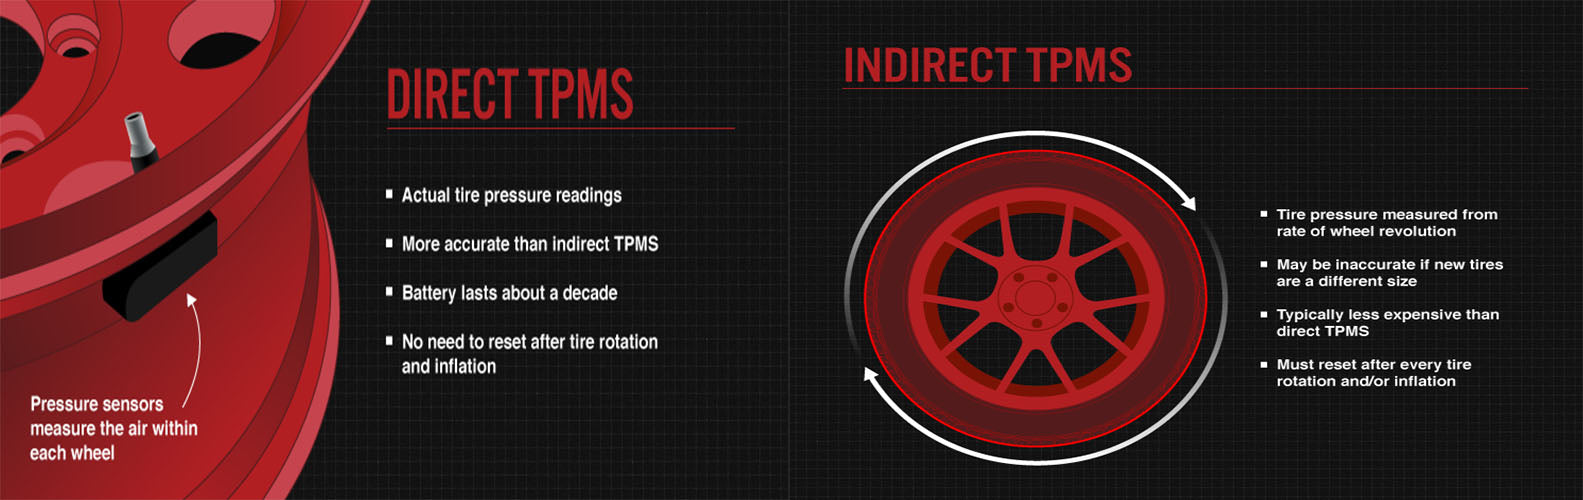 Different between Indirect TPMS and direct TPMS